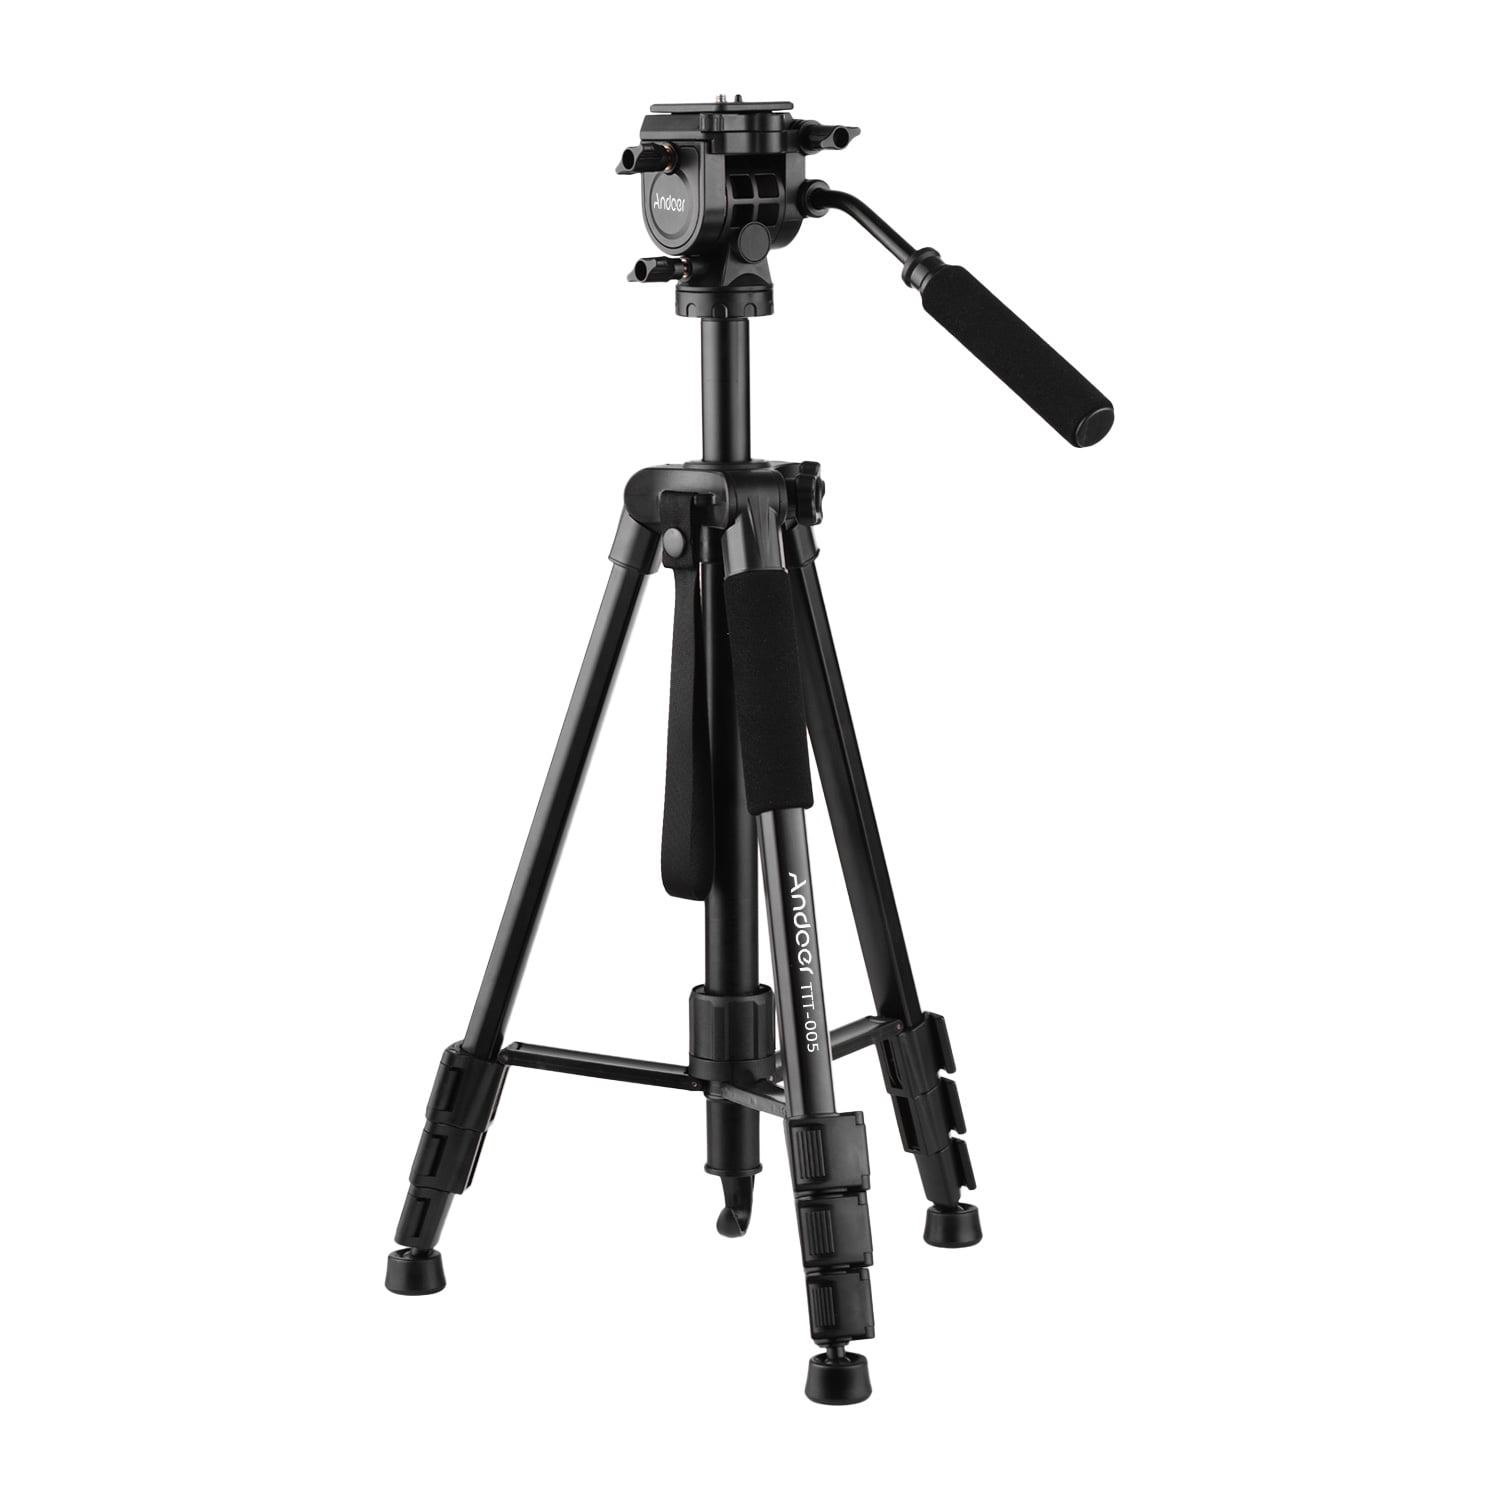 50" AGFAPHOTO Tripod With Case For Sony a7 III a7r III 